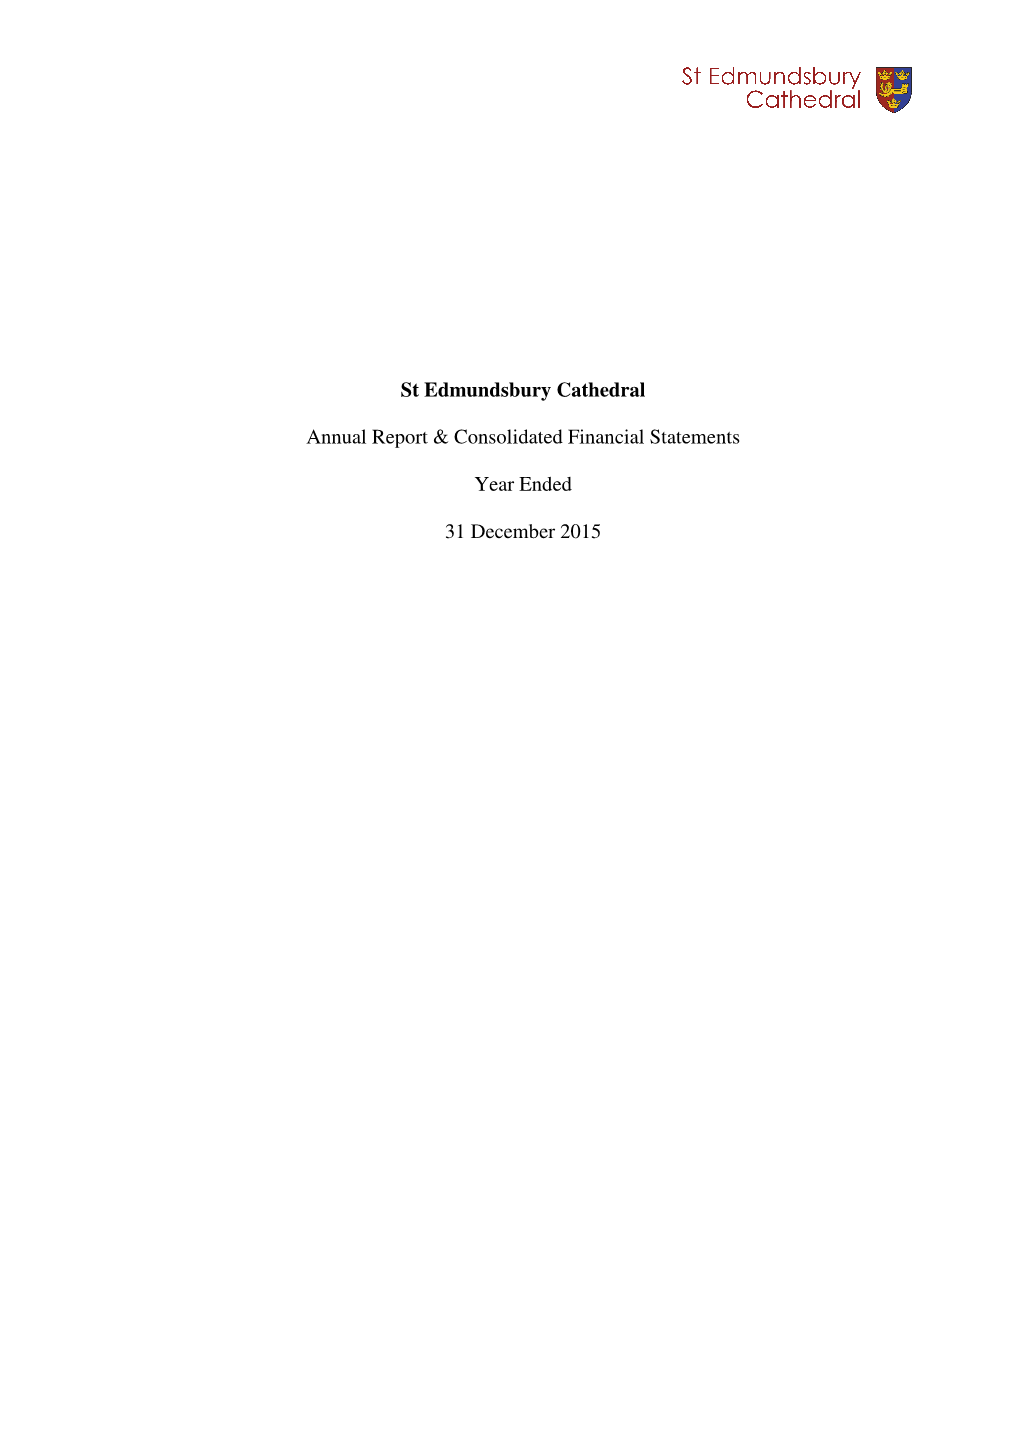 St Edmundsbury Cathedral Annual Report & Consolidated Financial Statements Year Ended 31 December 2015